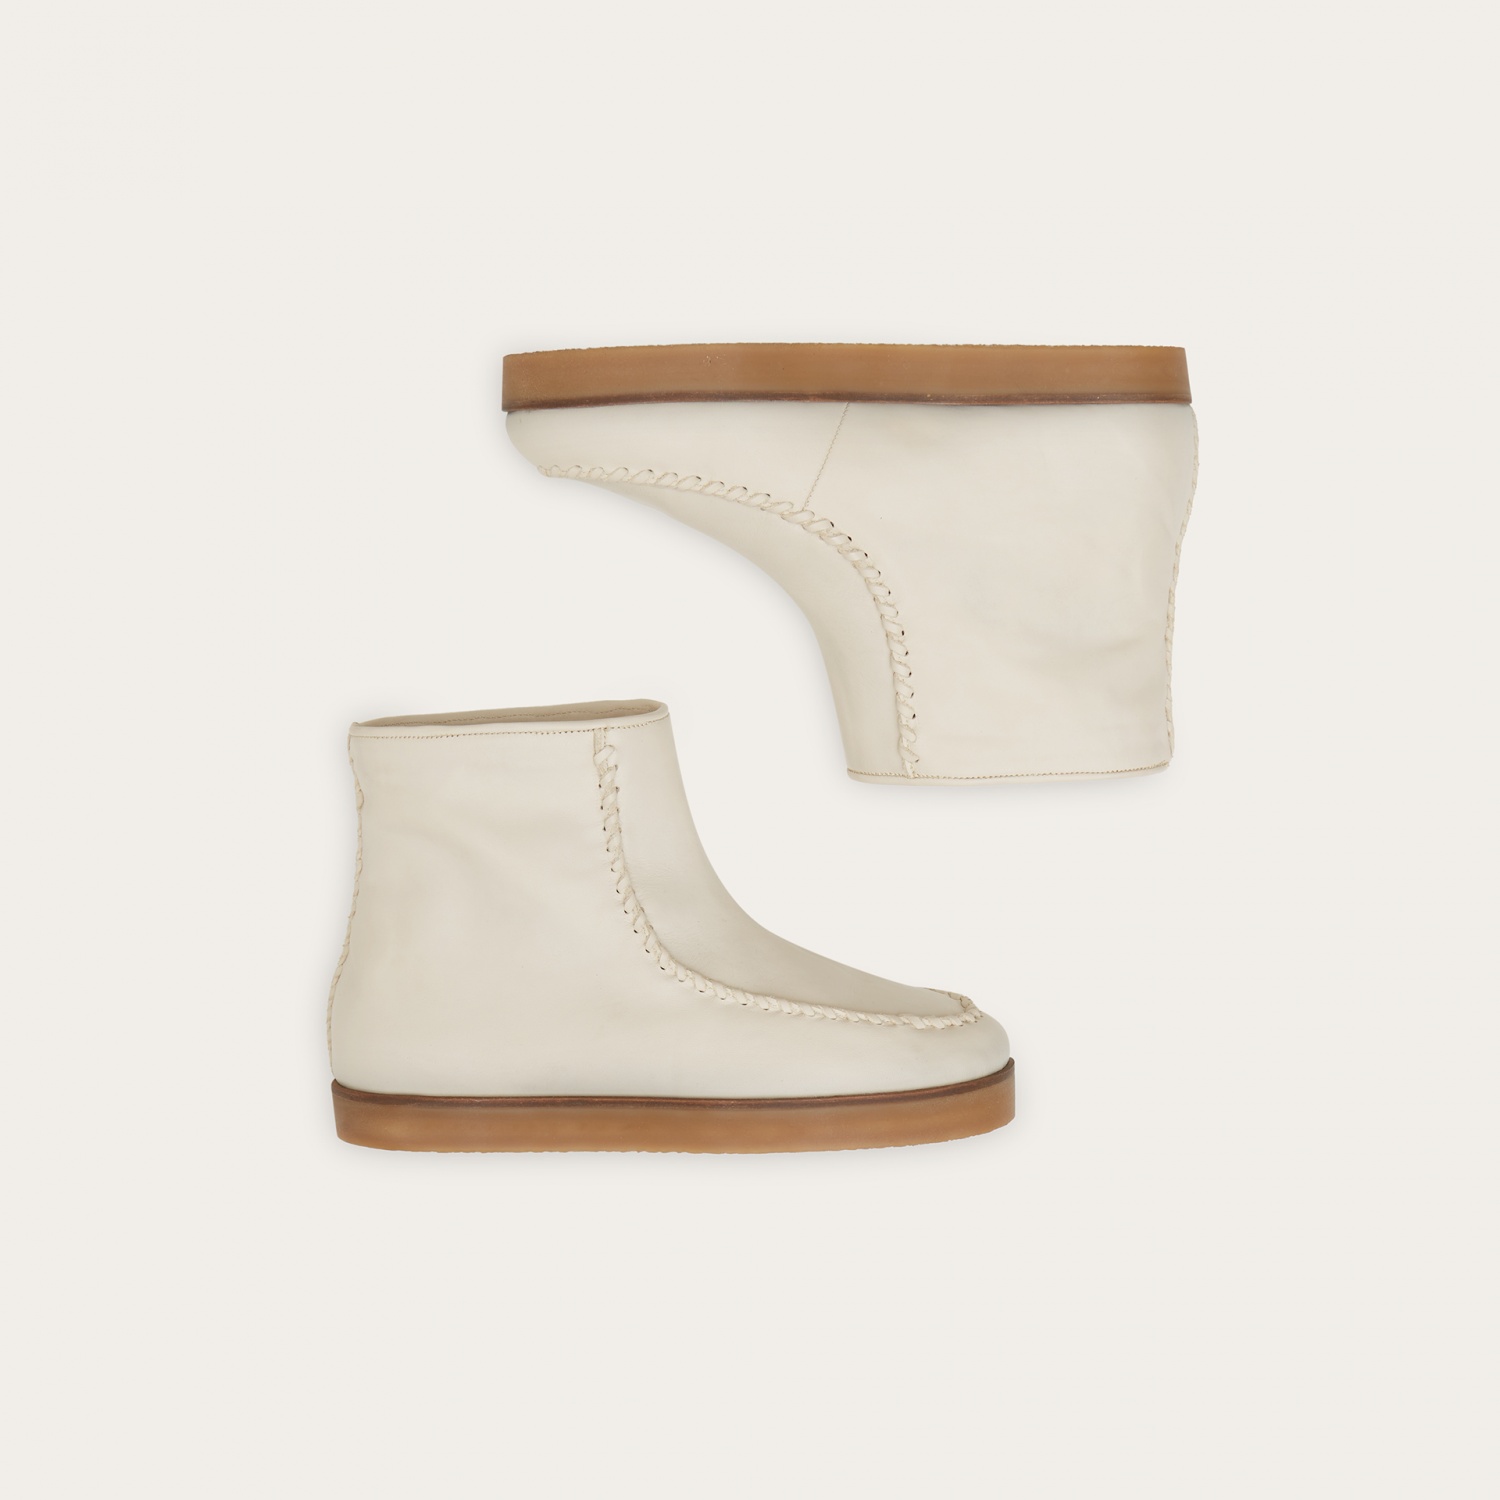  Kor Boots, off white-4 